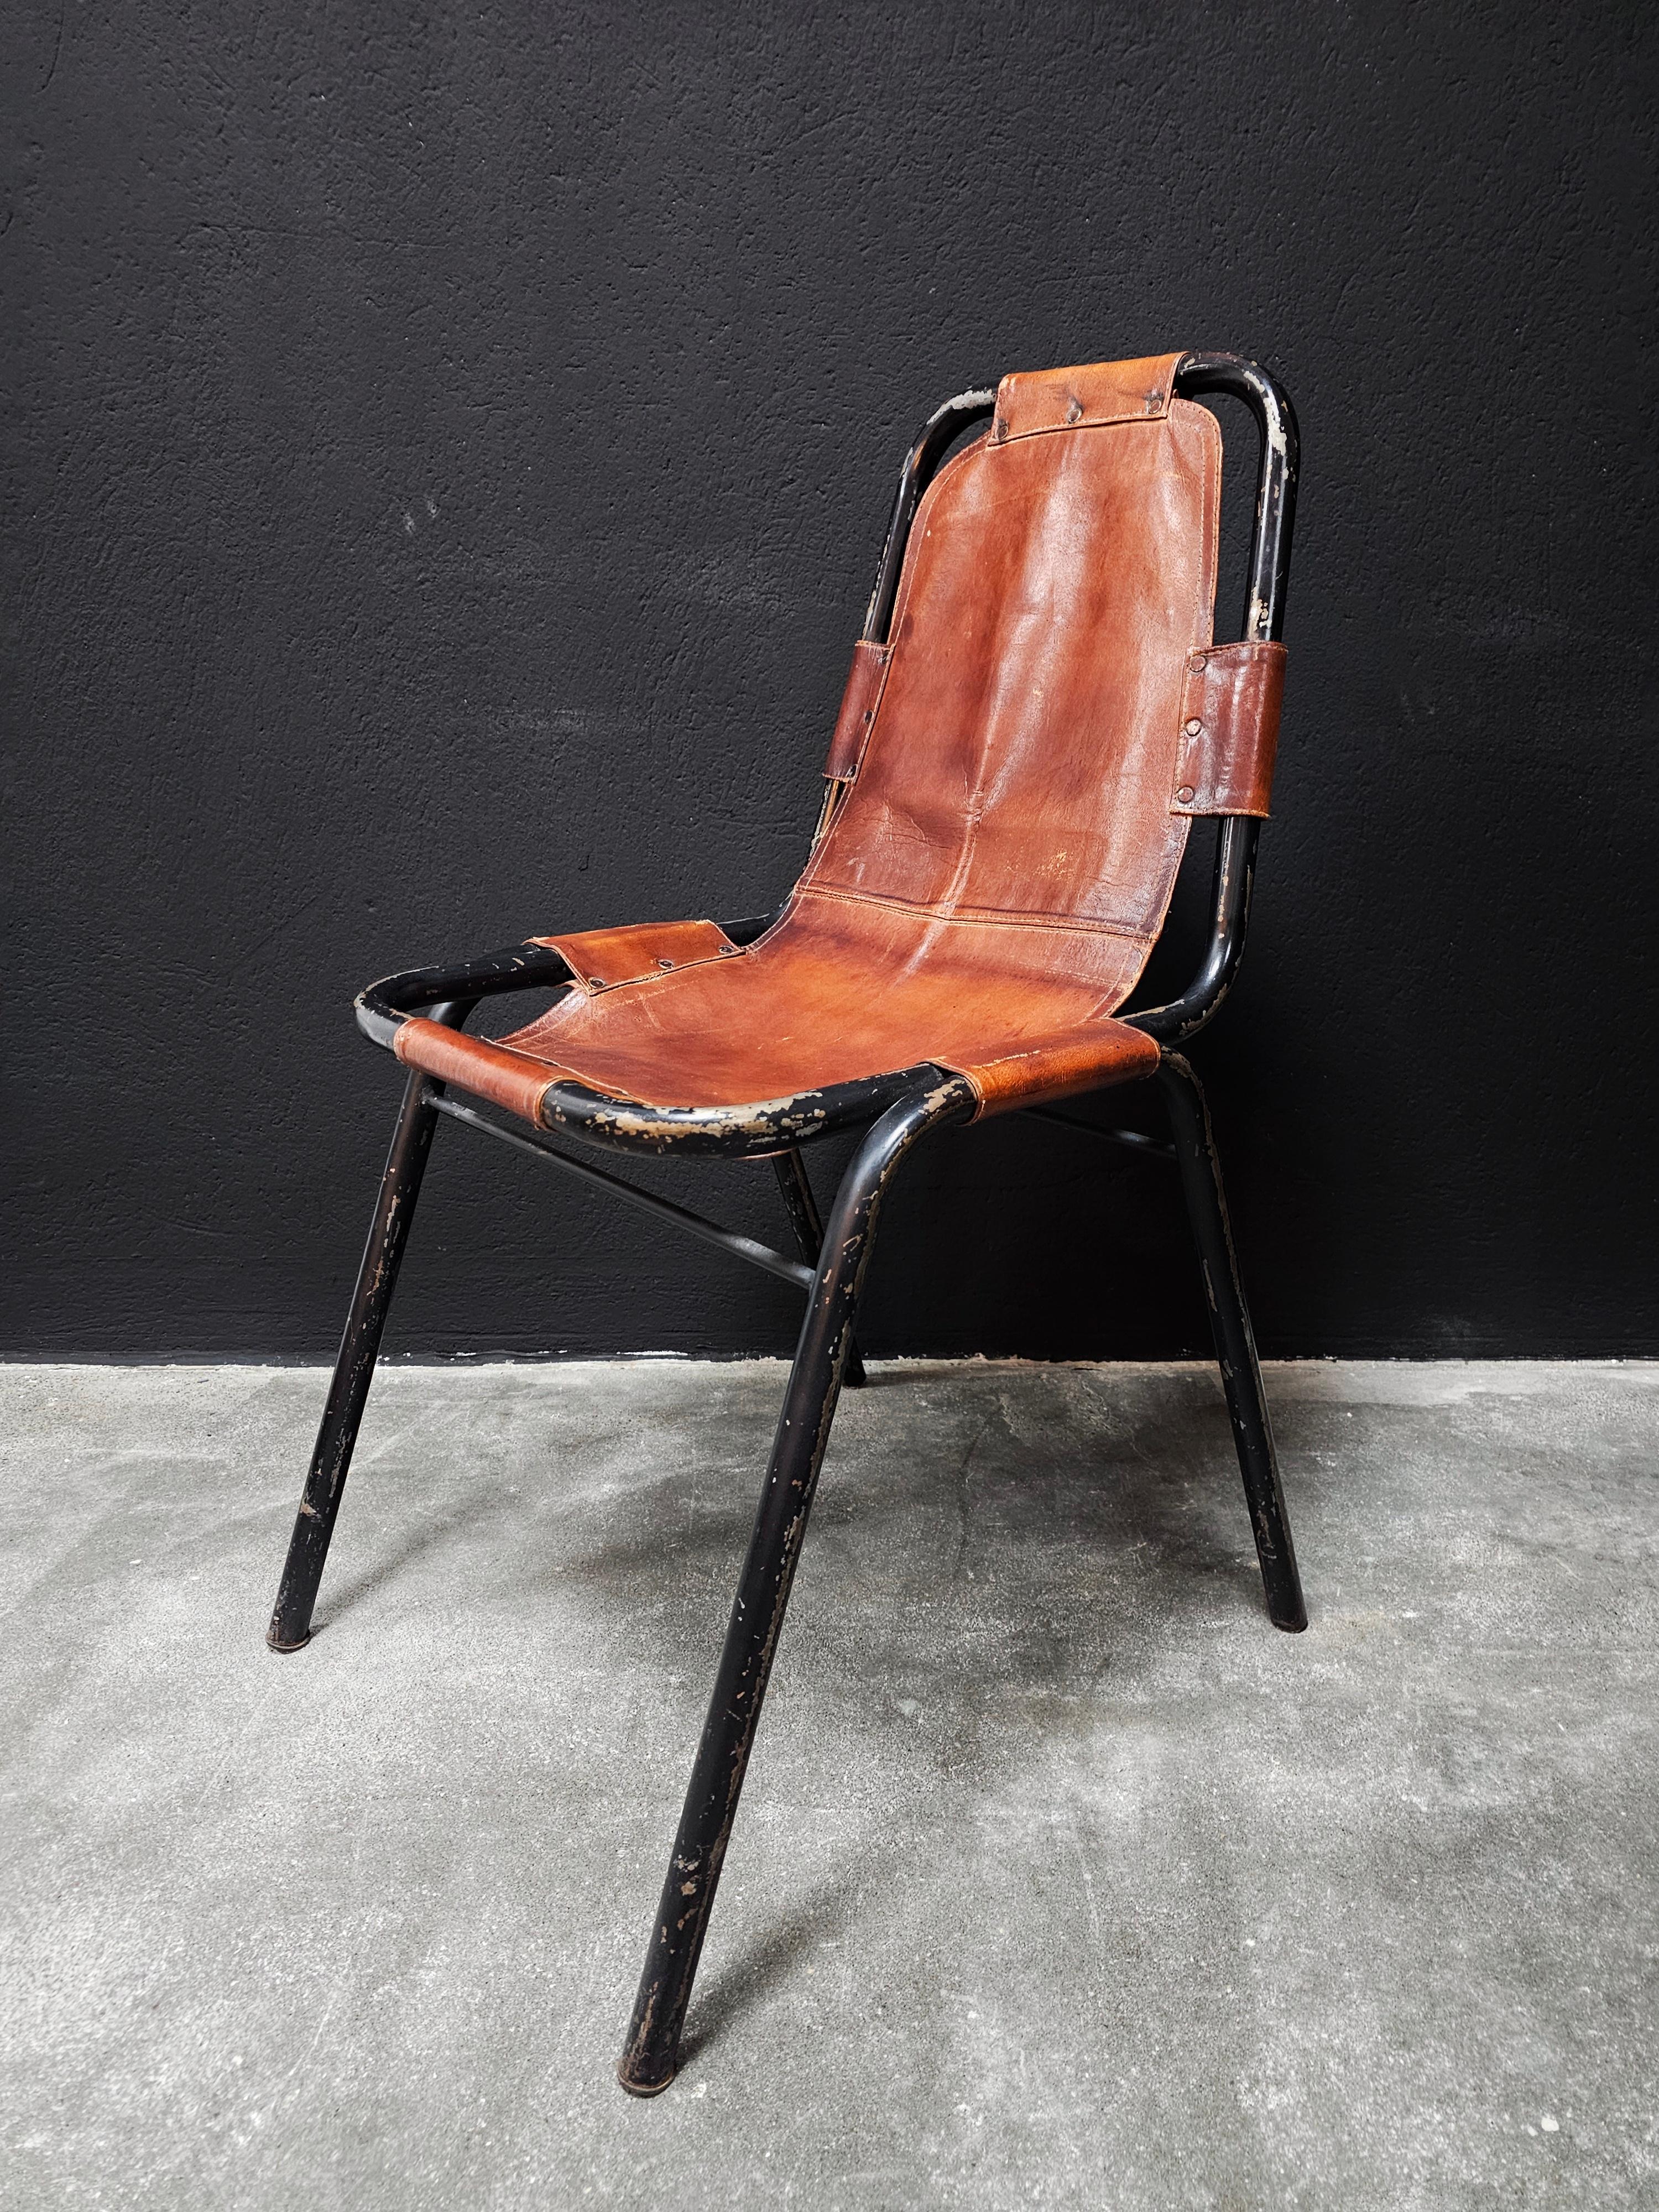 In this listing you will find three Bauhaus Leather Dining Chairs designed and manufactured by DalVera in the style of Charlotte Perriand. The chairs feature black tubular frame and cognac leather seats. the black frames indicate that this is the